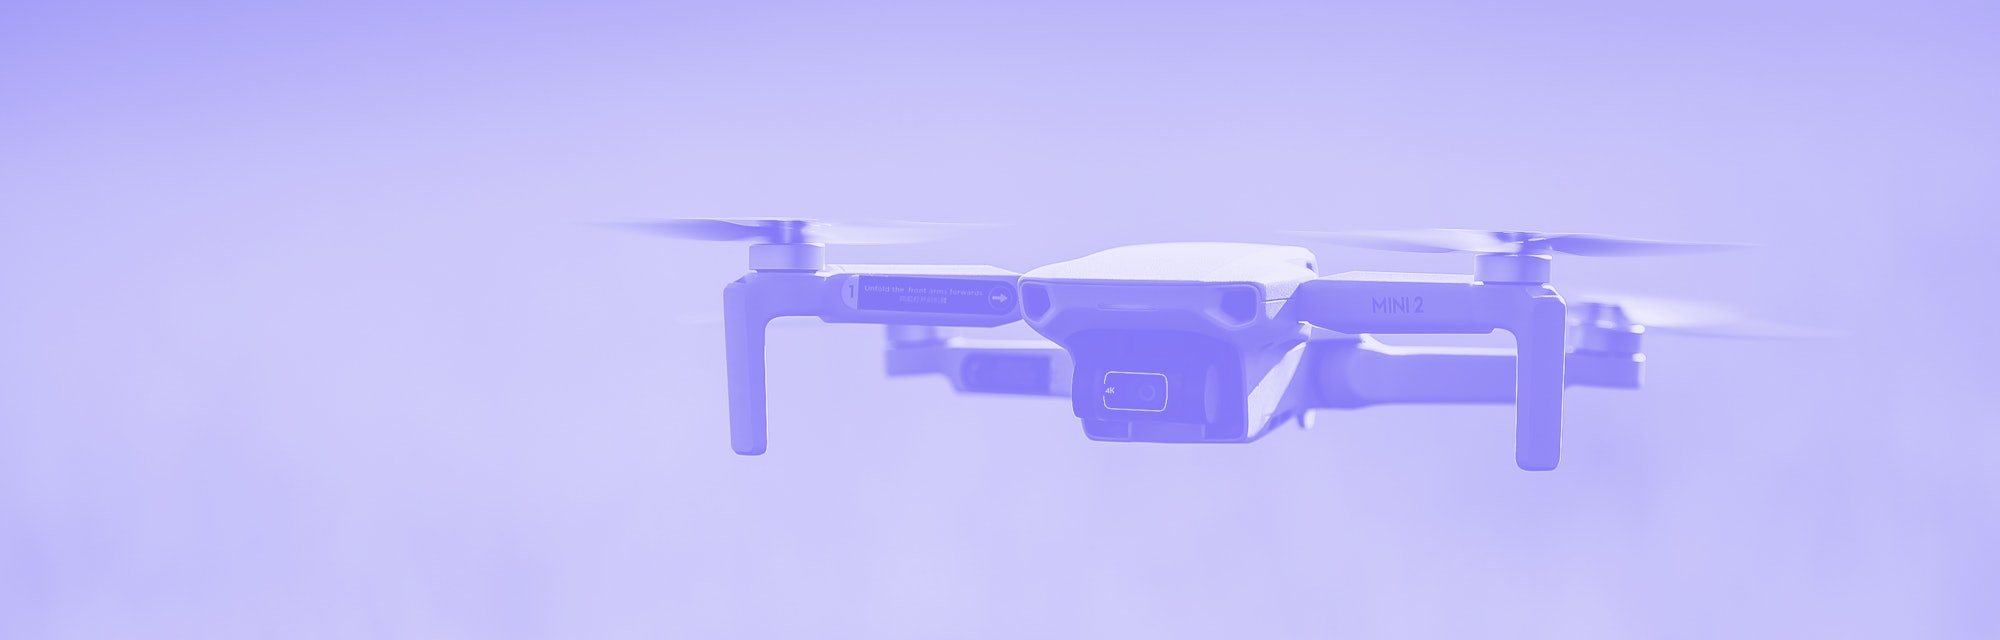 Mavic mini 2 flying over green background. "Mavic mini 2 was launched on November 2020 and is the su...